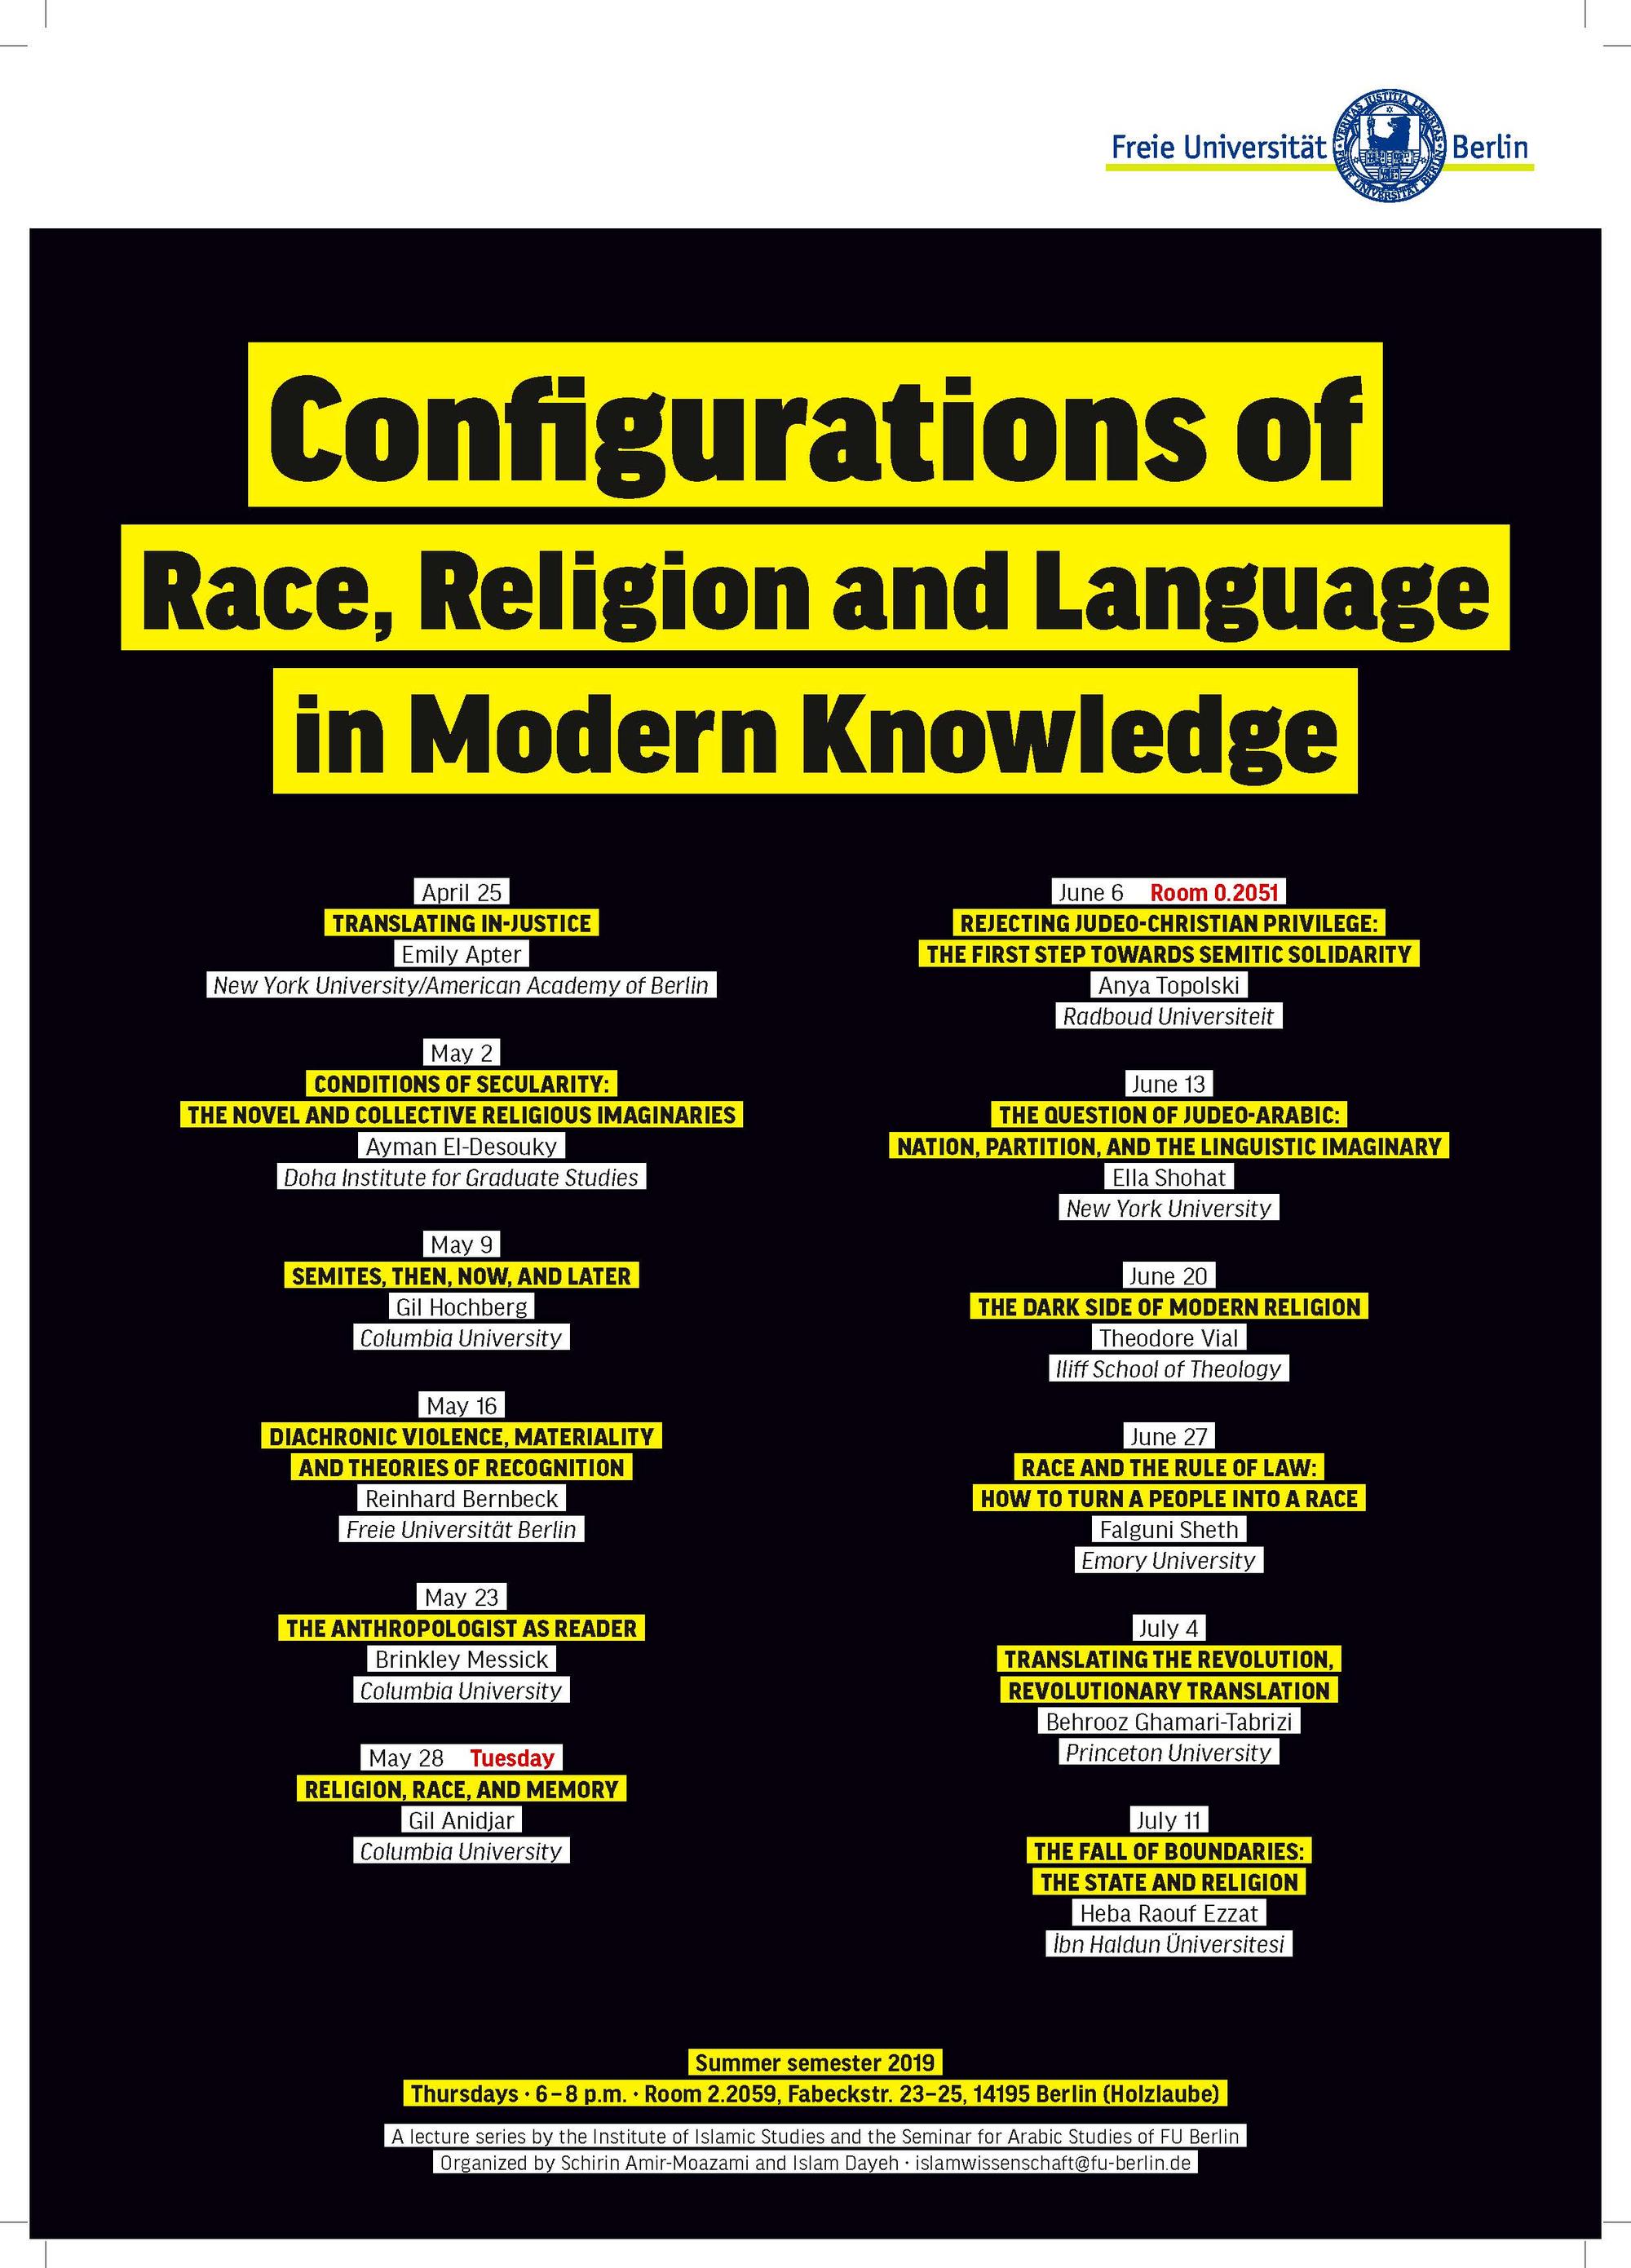 lecture_series_Configurations_of_Race_Religion_and_Language_Summer 2019